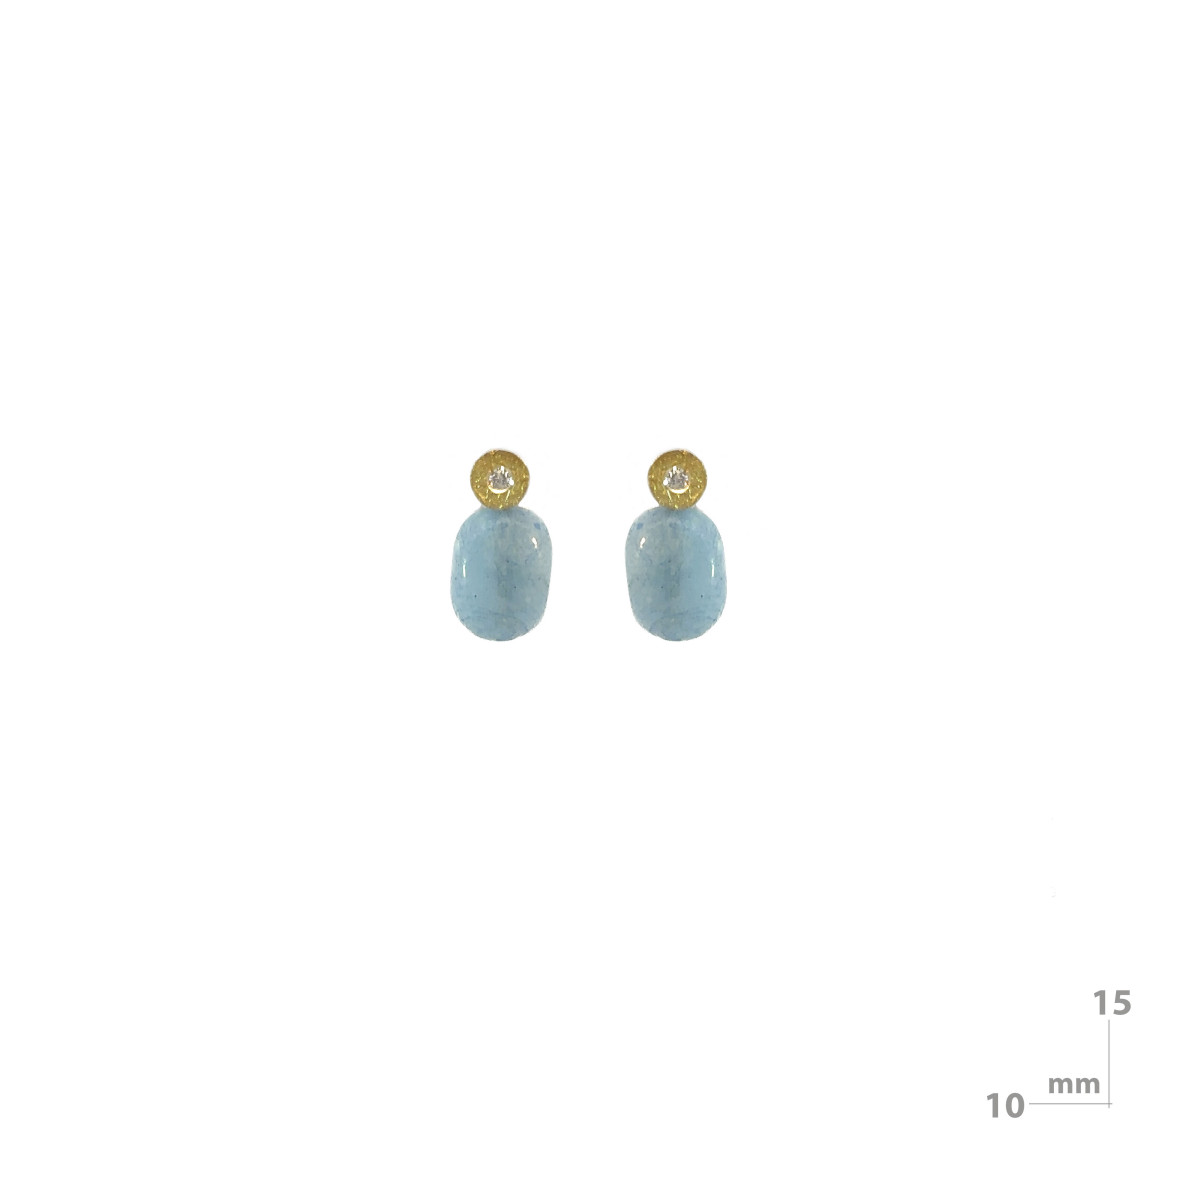 Silver, gold, brilliant and aquamarine earrings